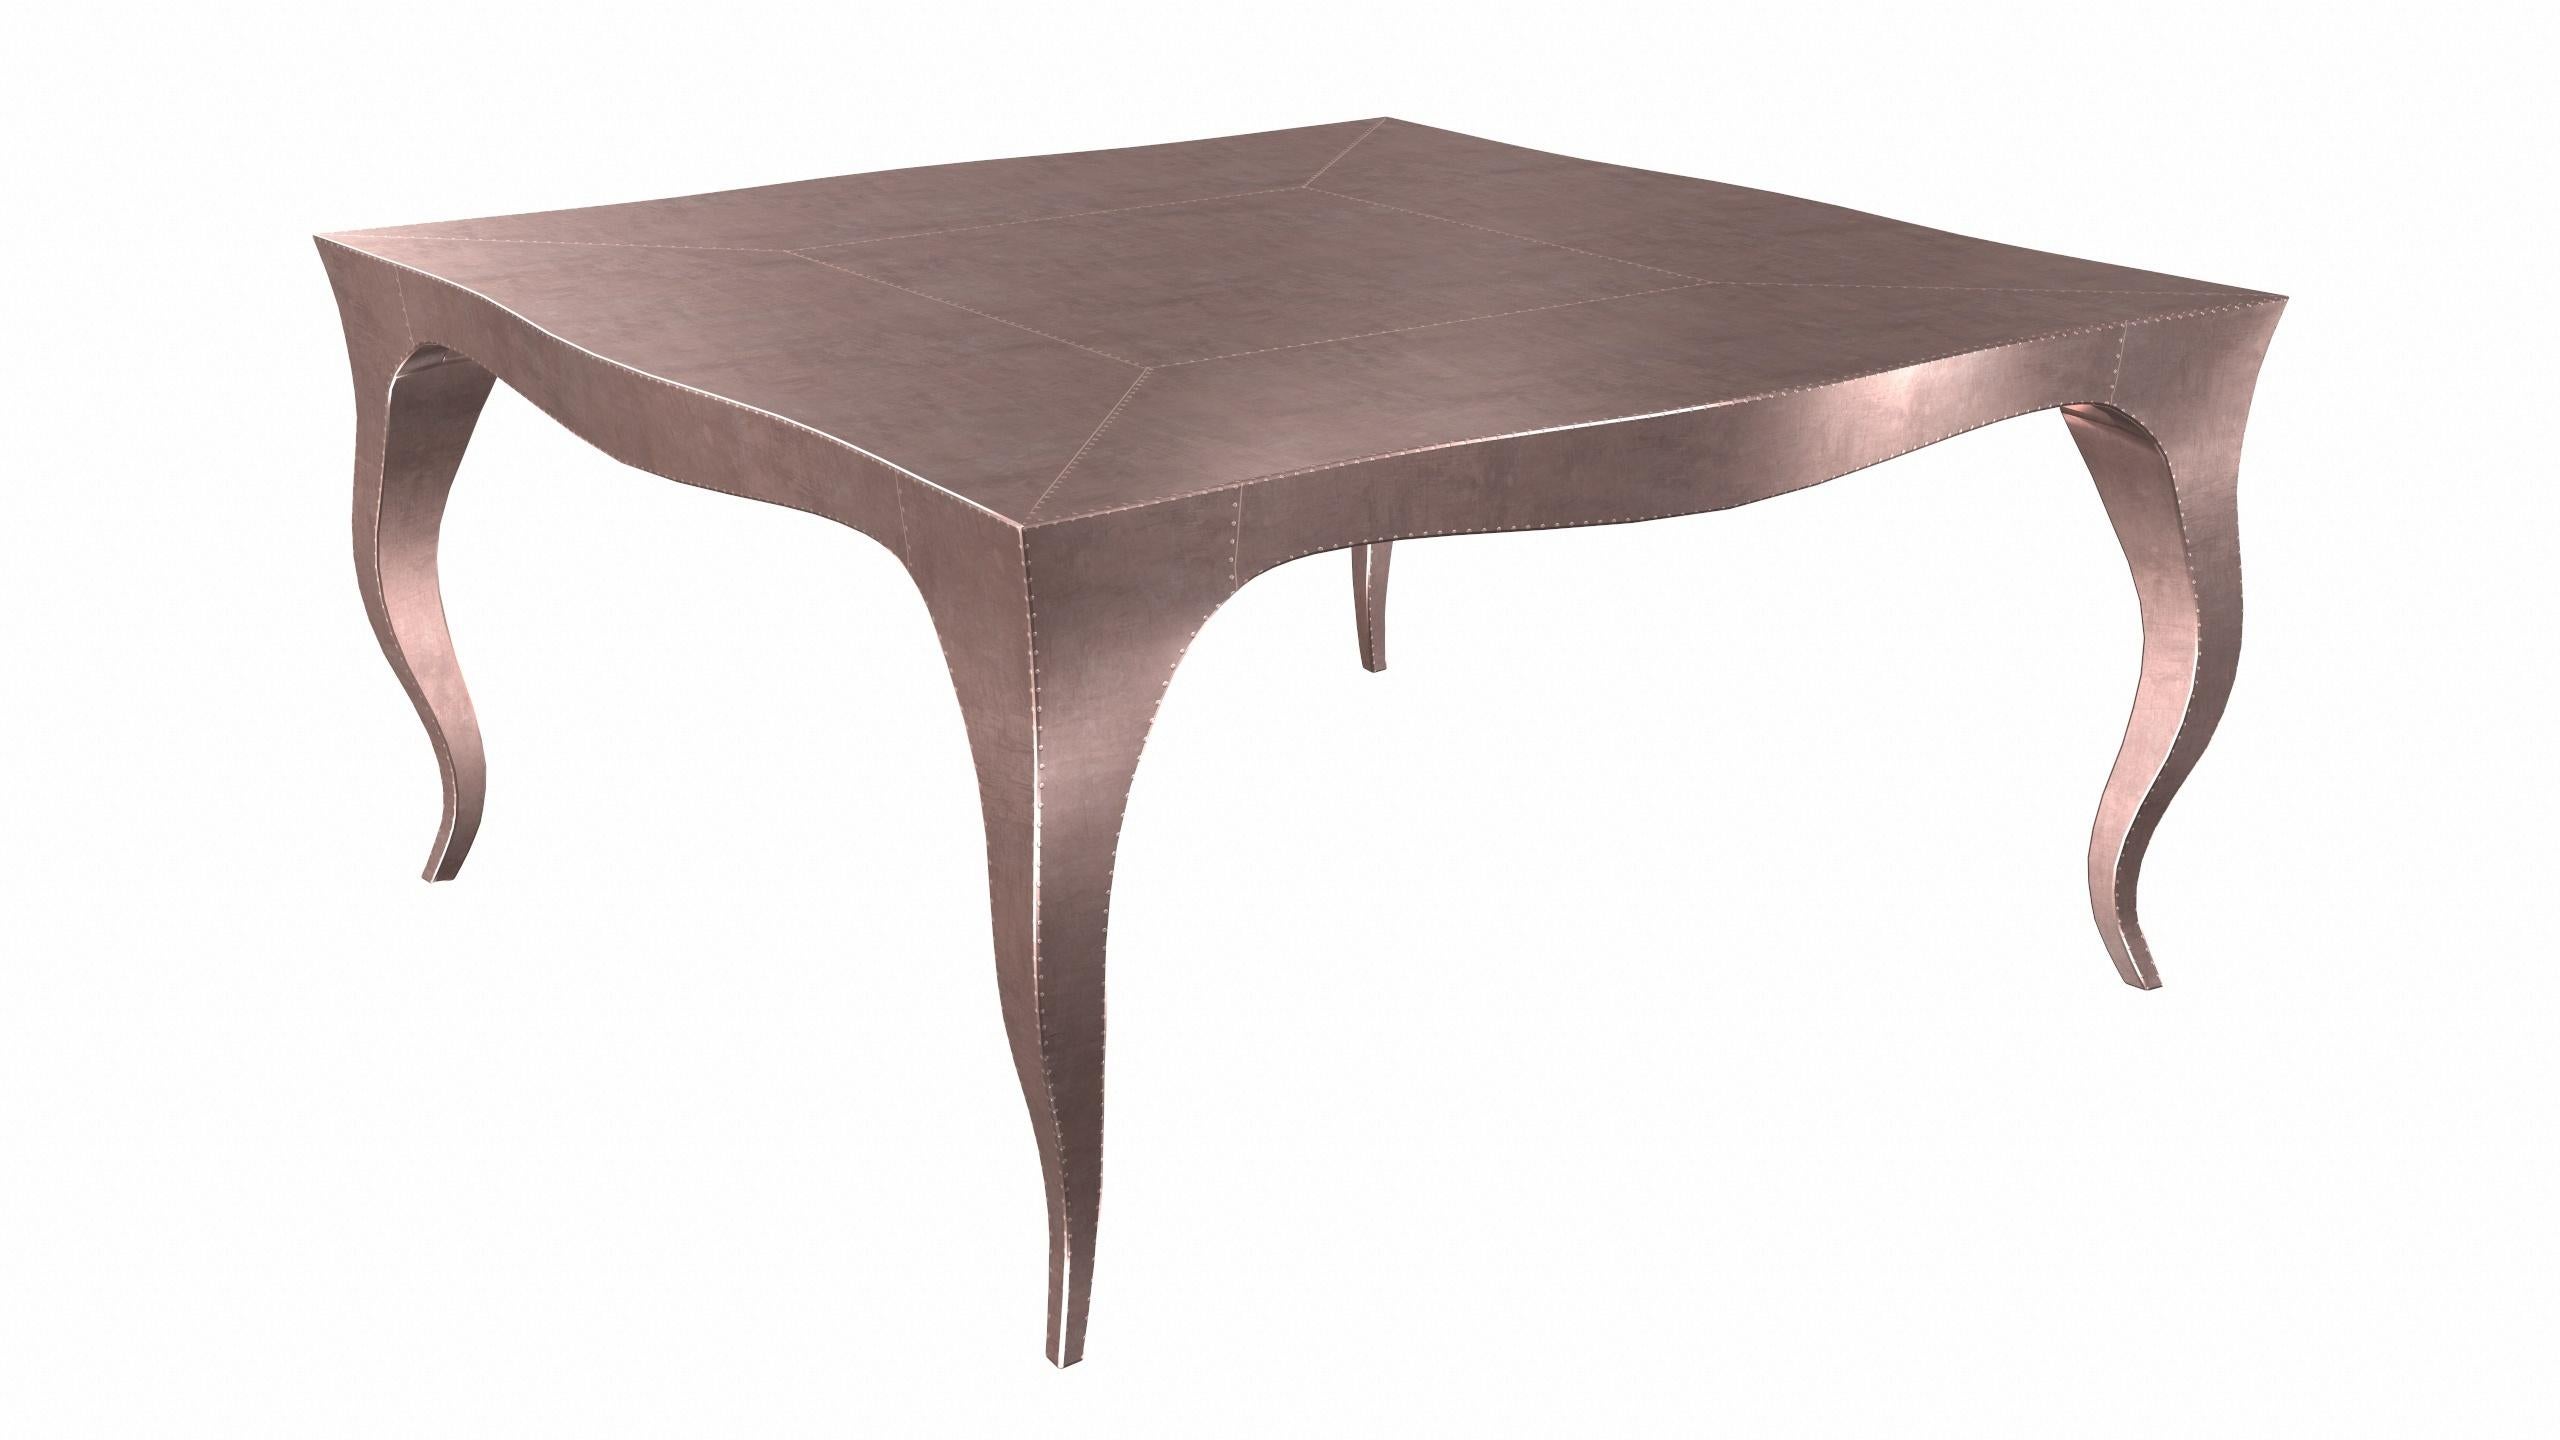 Metal Louise Art Deco Coffee and Cocktail Tables Smooth Copper by Paul Mathieu For Sale